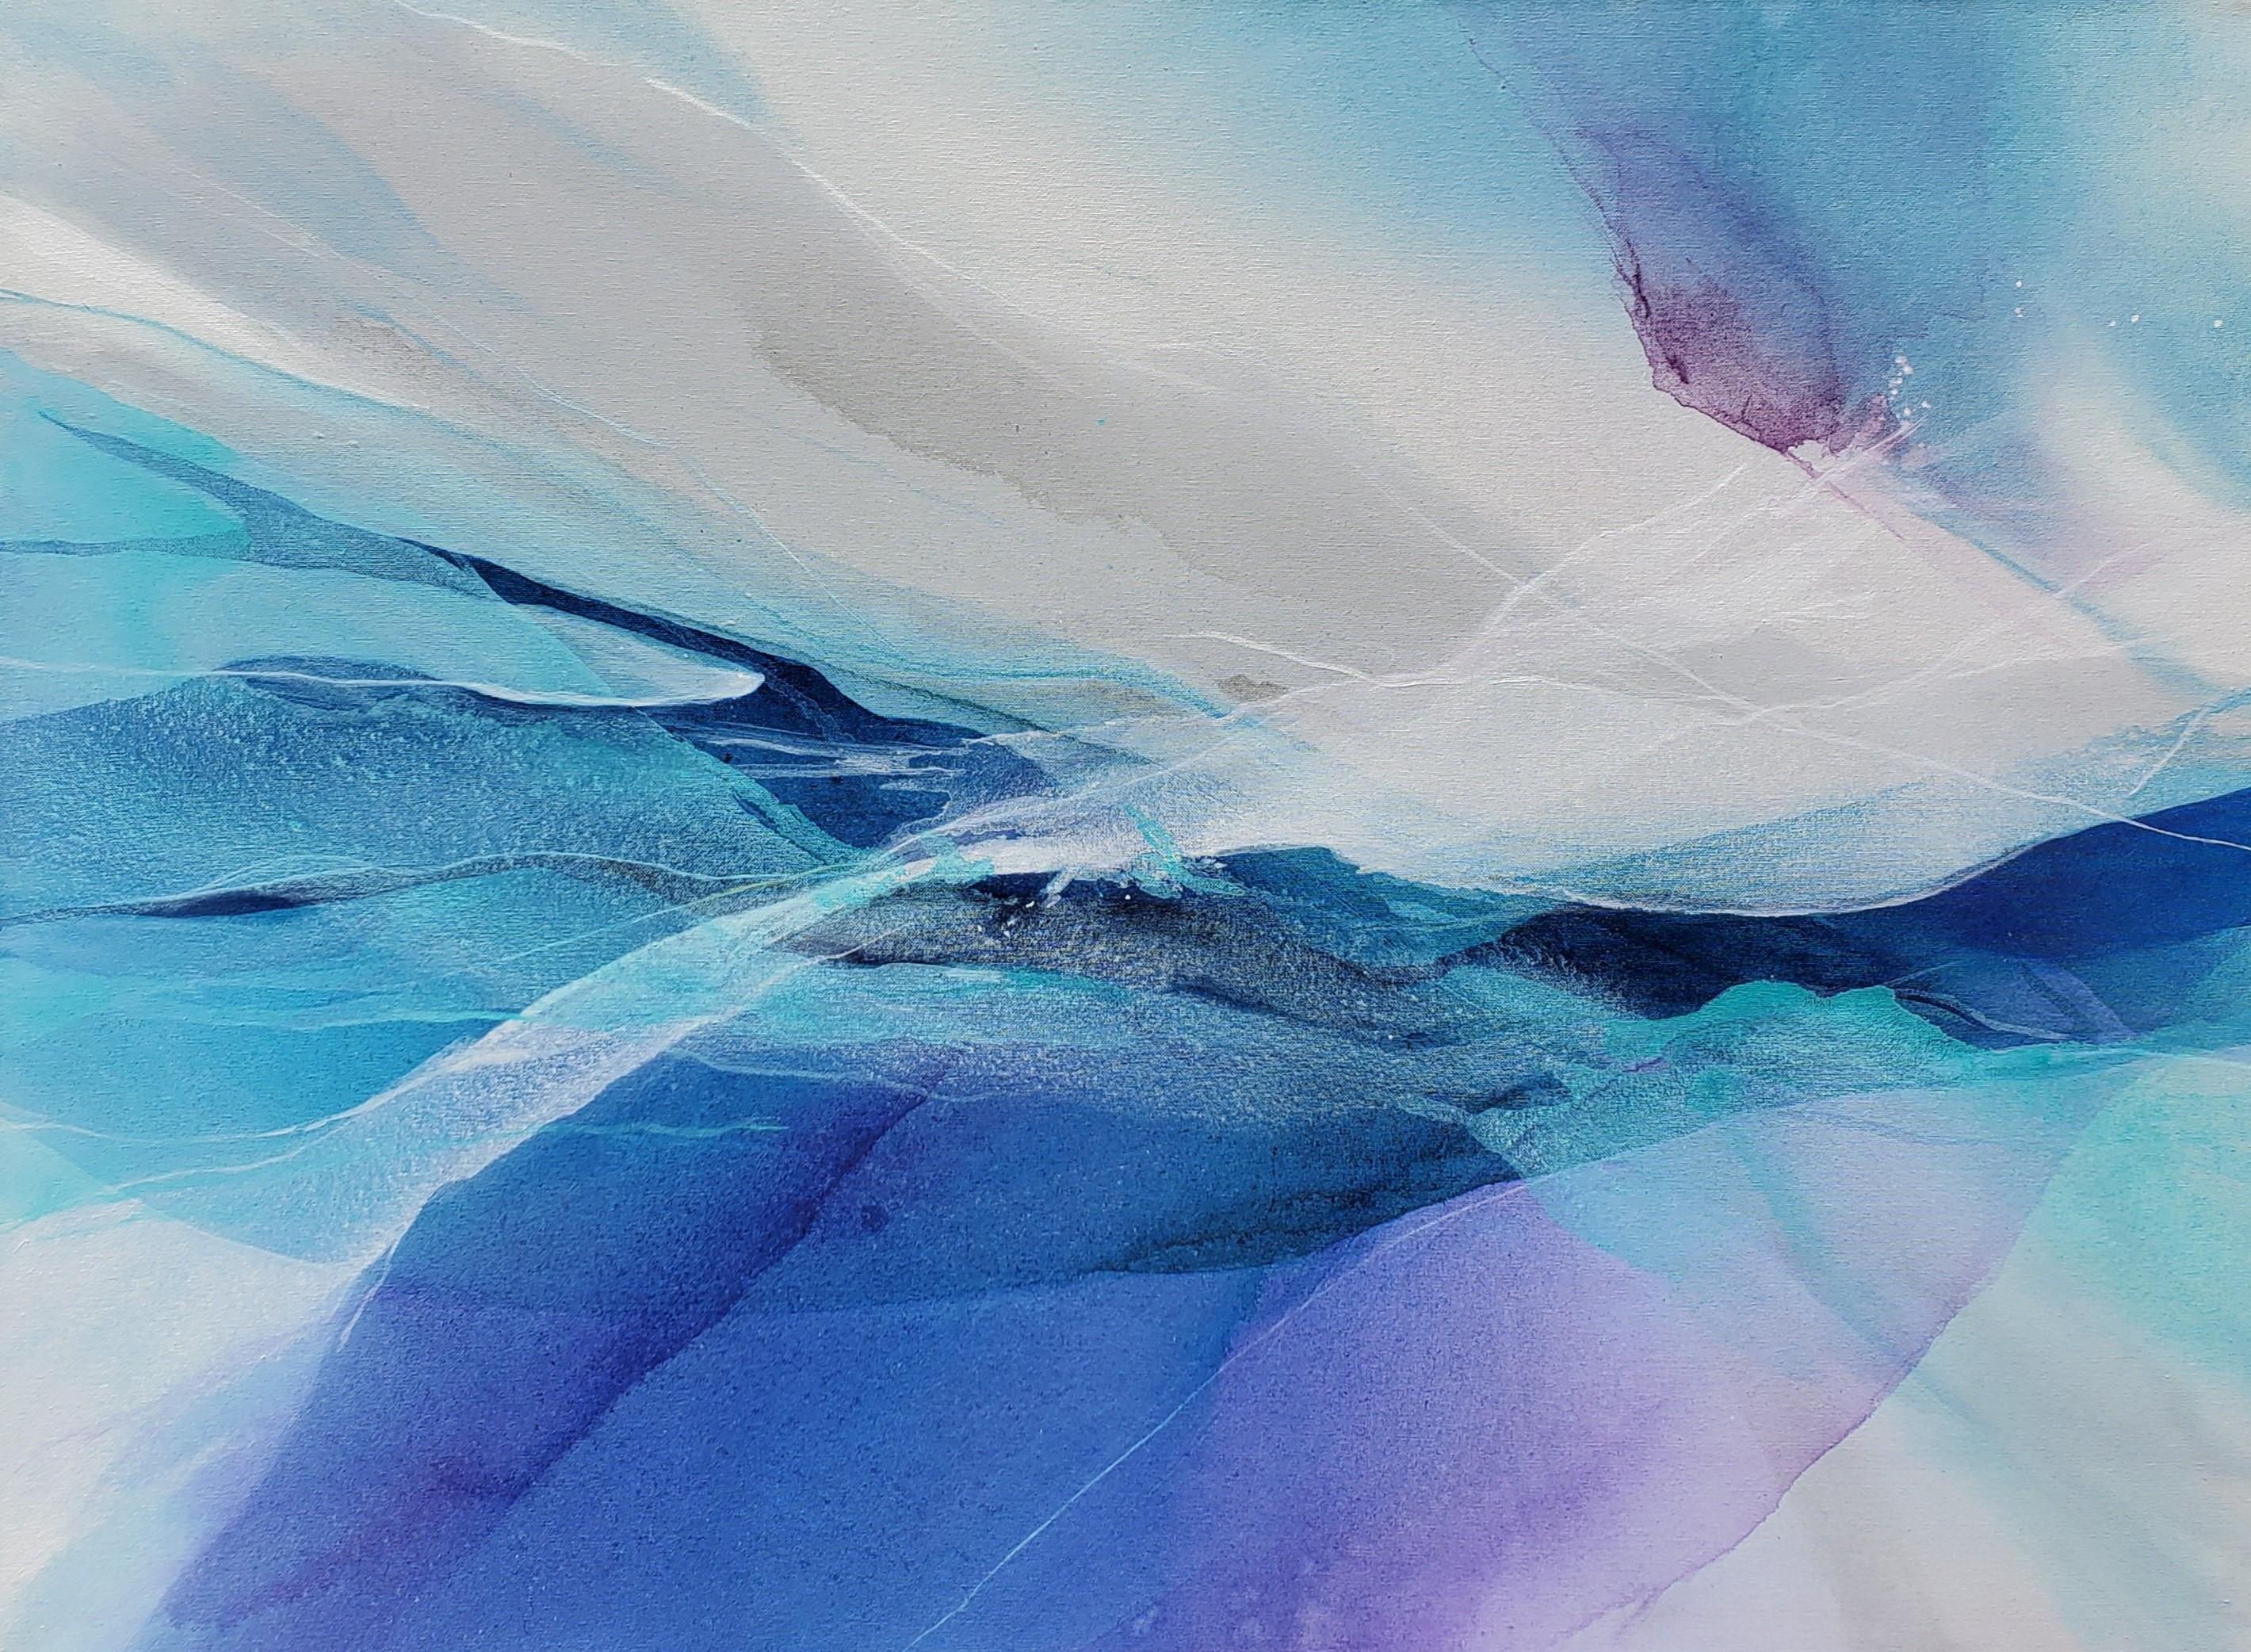 <p>Artist Comments<br />A celestial abstract painting in layers of blues, purple, gray and white blended to create pools of light and shadow. Artist Dorothy Dunn continually observes the ever-changing light and color of the sky and ocean. "Does this